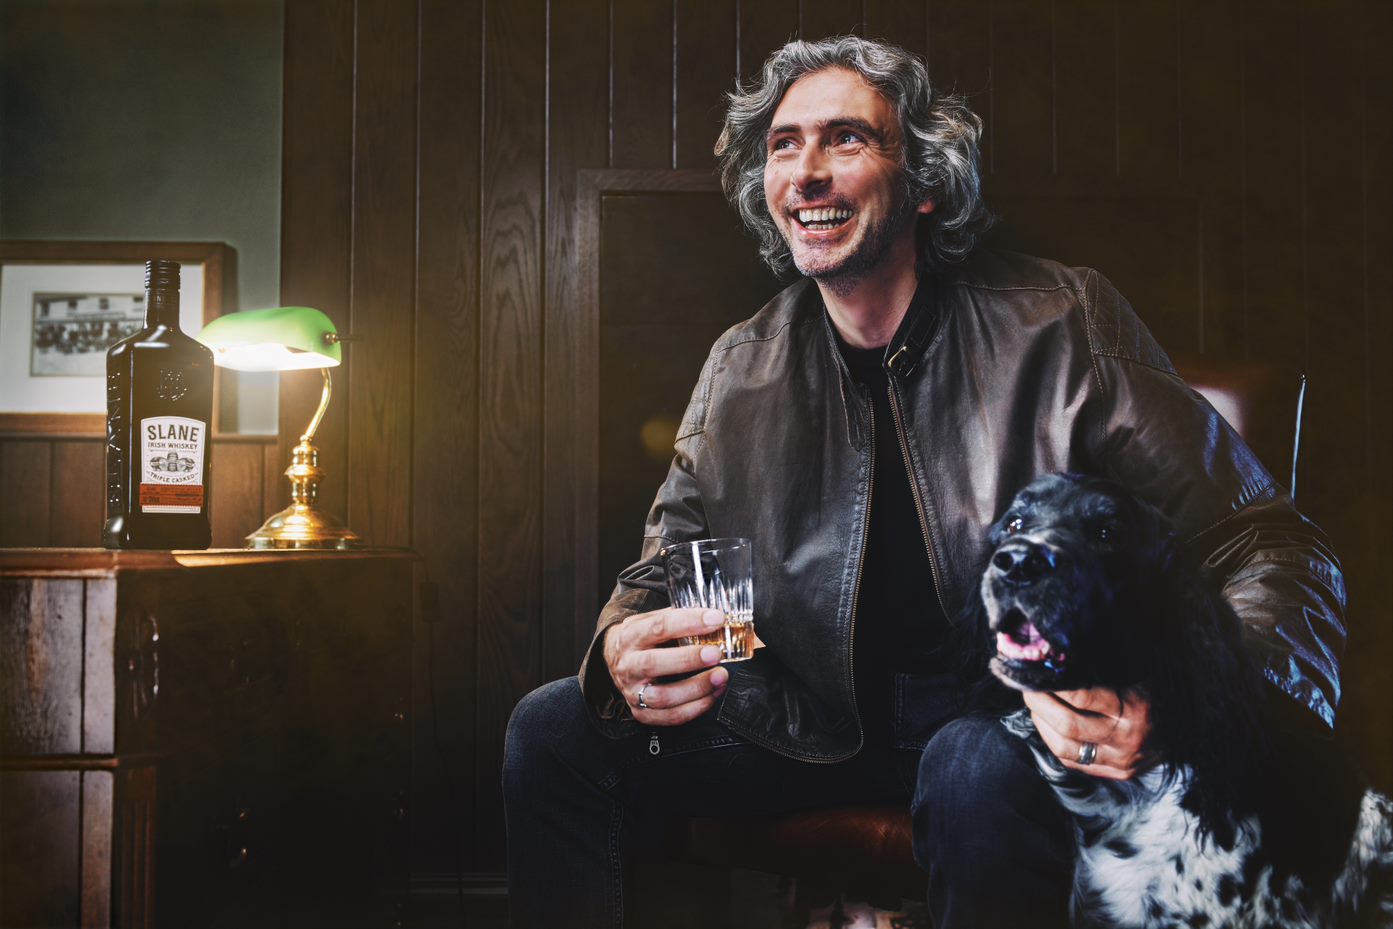 AAlex Conyngham and his trusted companion. Slane Whiskey. Image provided